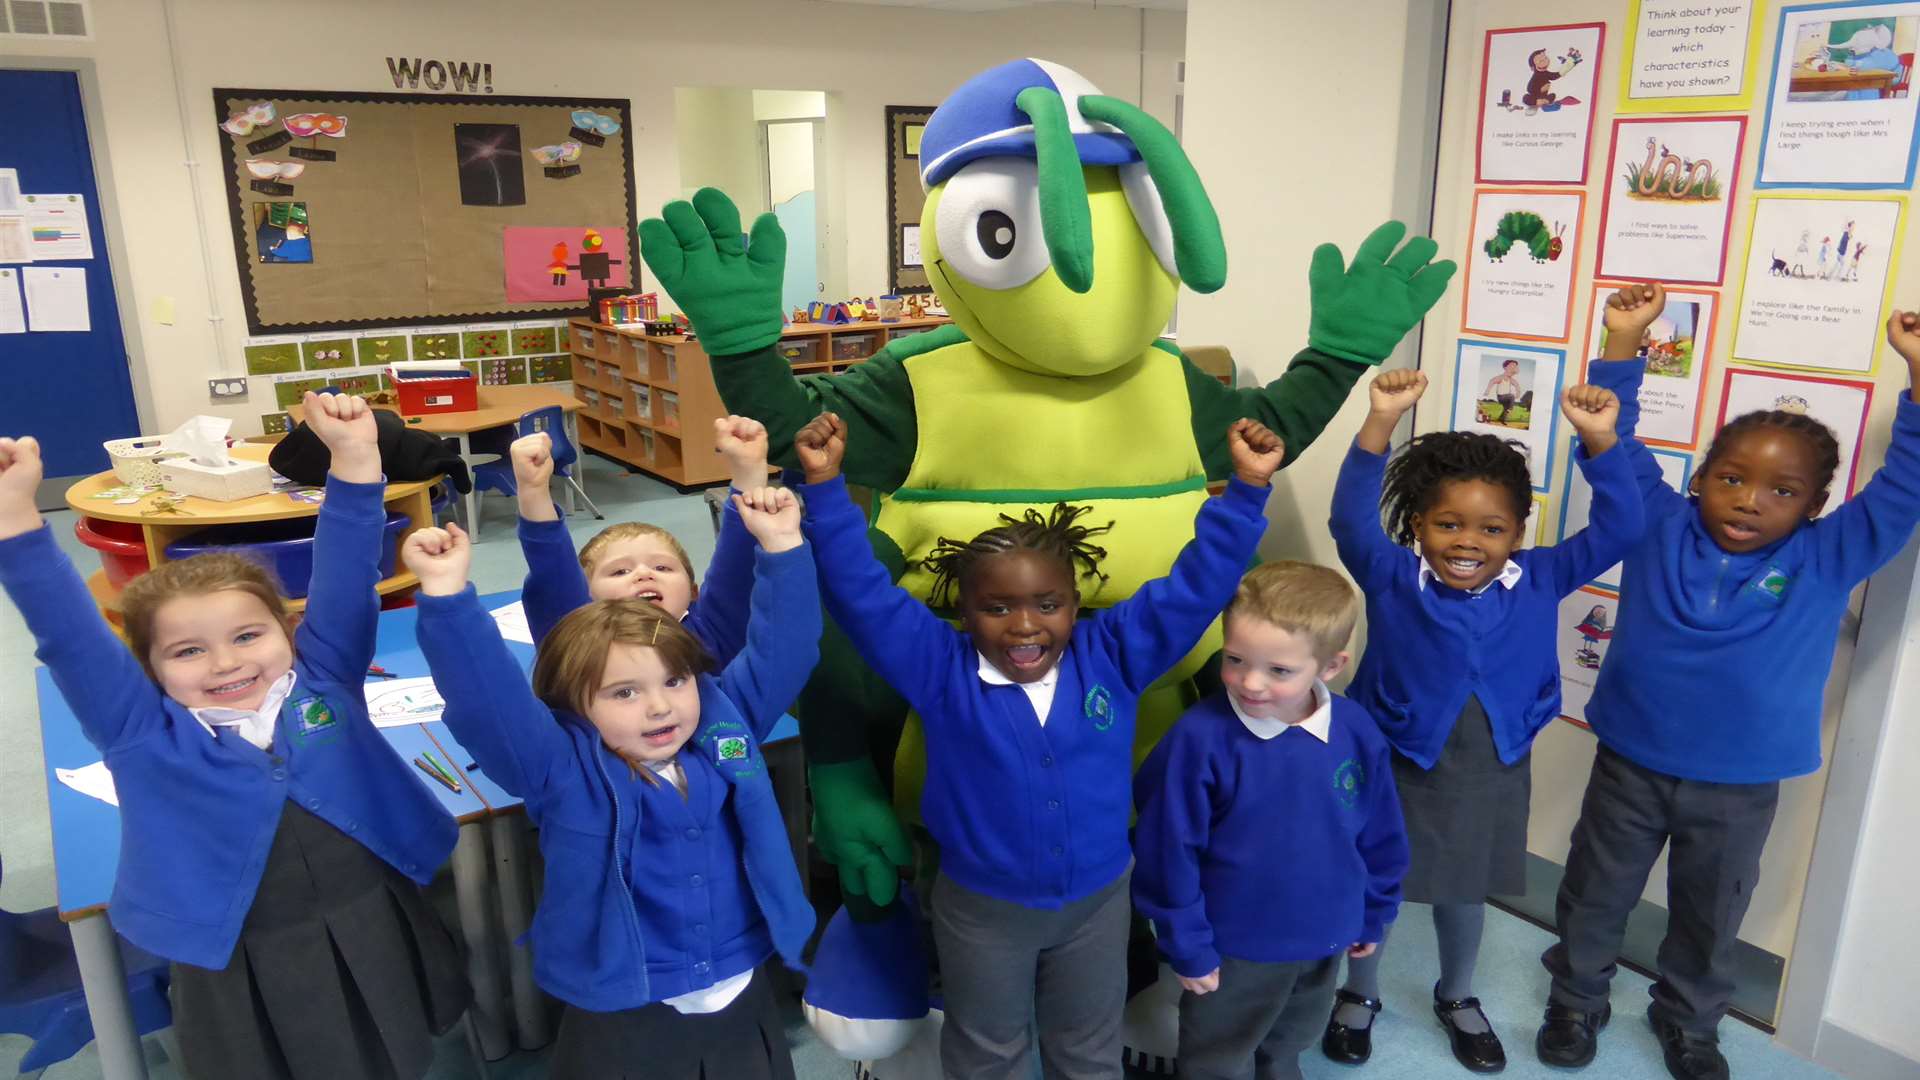 Northumberland Heath Primary School in Bexley will be taking part in the KM Walk to School Triple Challenge.